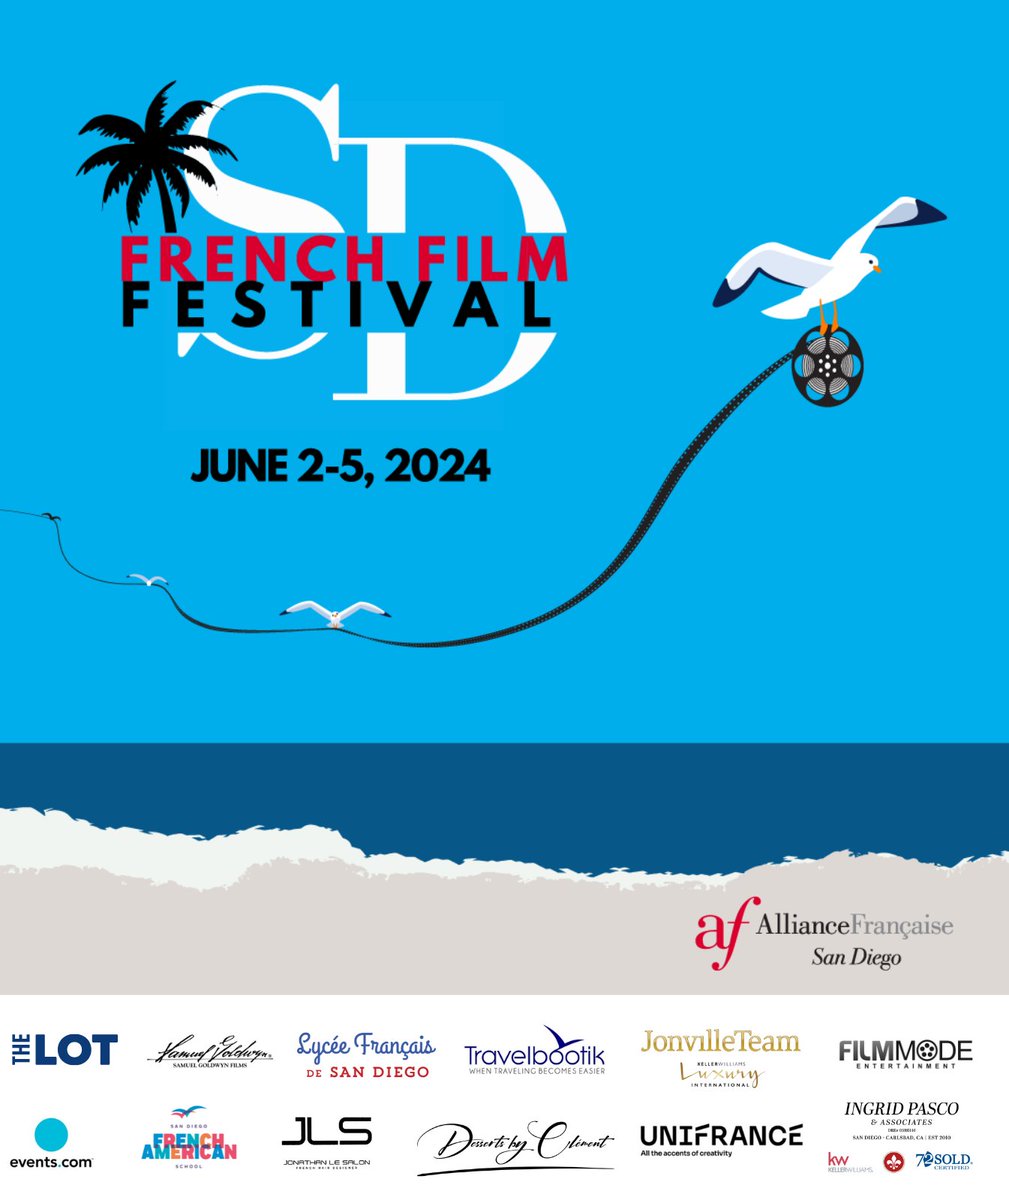 On June 2-5, the much-anticipated San Diego French Film Festival returns for a fourth edition! An elegant reception will open the festival, followed by screenings of Humanatee, Oceans, Monochrome, Omar la Fraise, Riad and Marinette. afsandiego.org/san-diego-fren… @villa_albertine